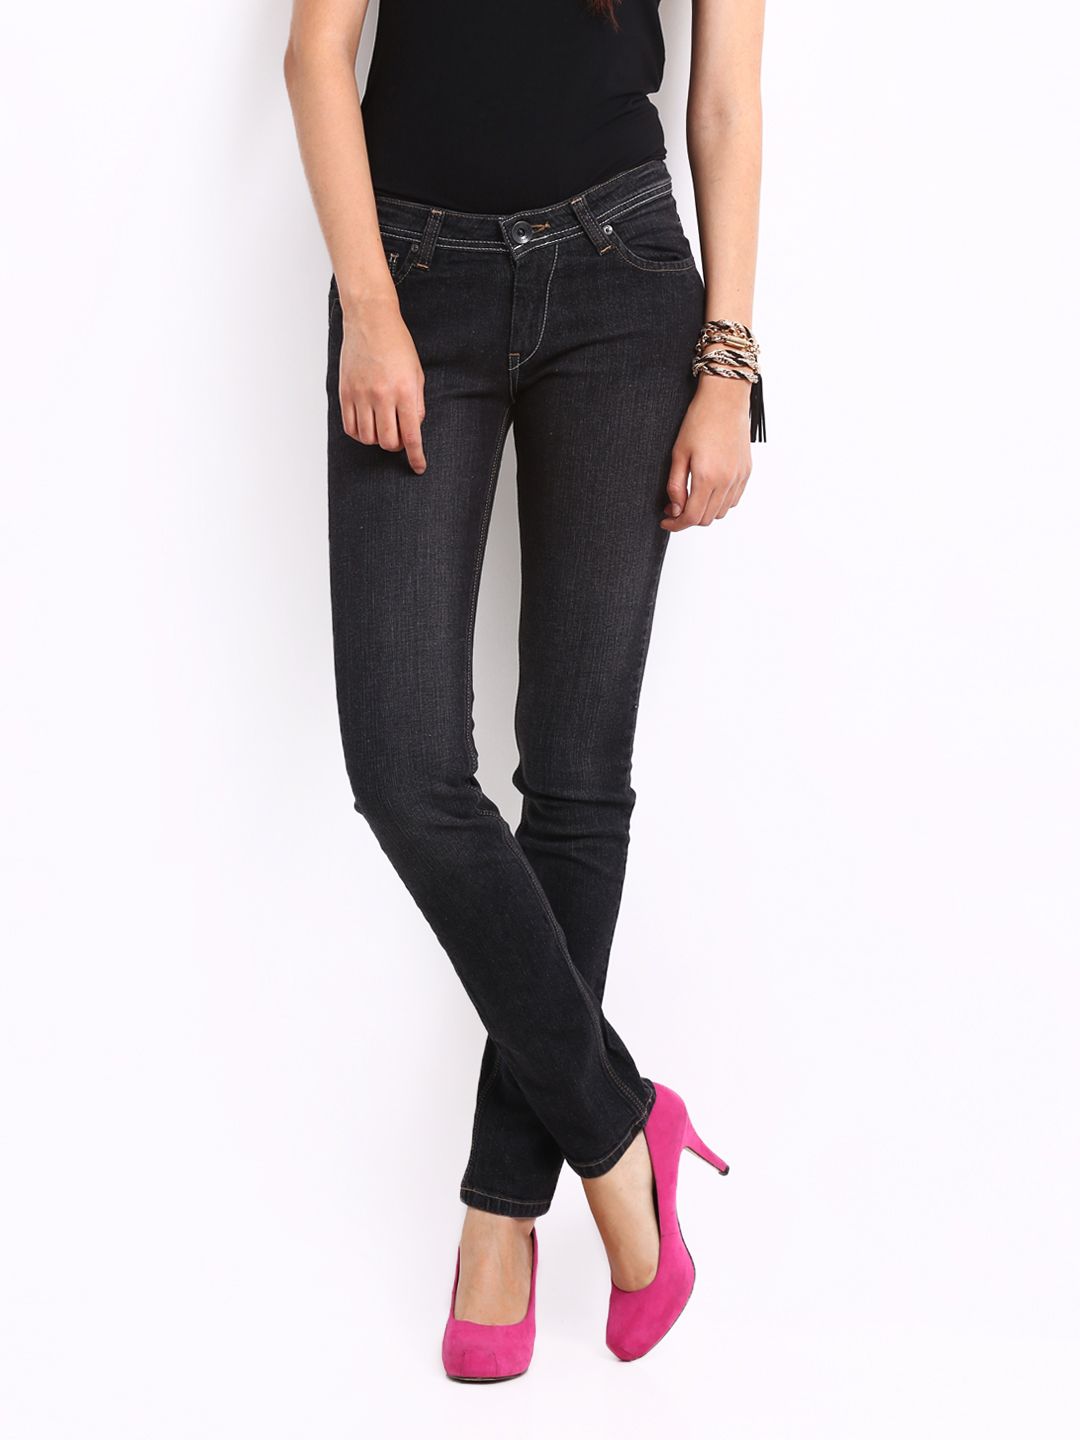 Pepe Jeans Women Black Frisky Slim Fit Jeans Price in India